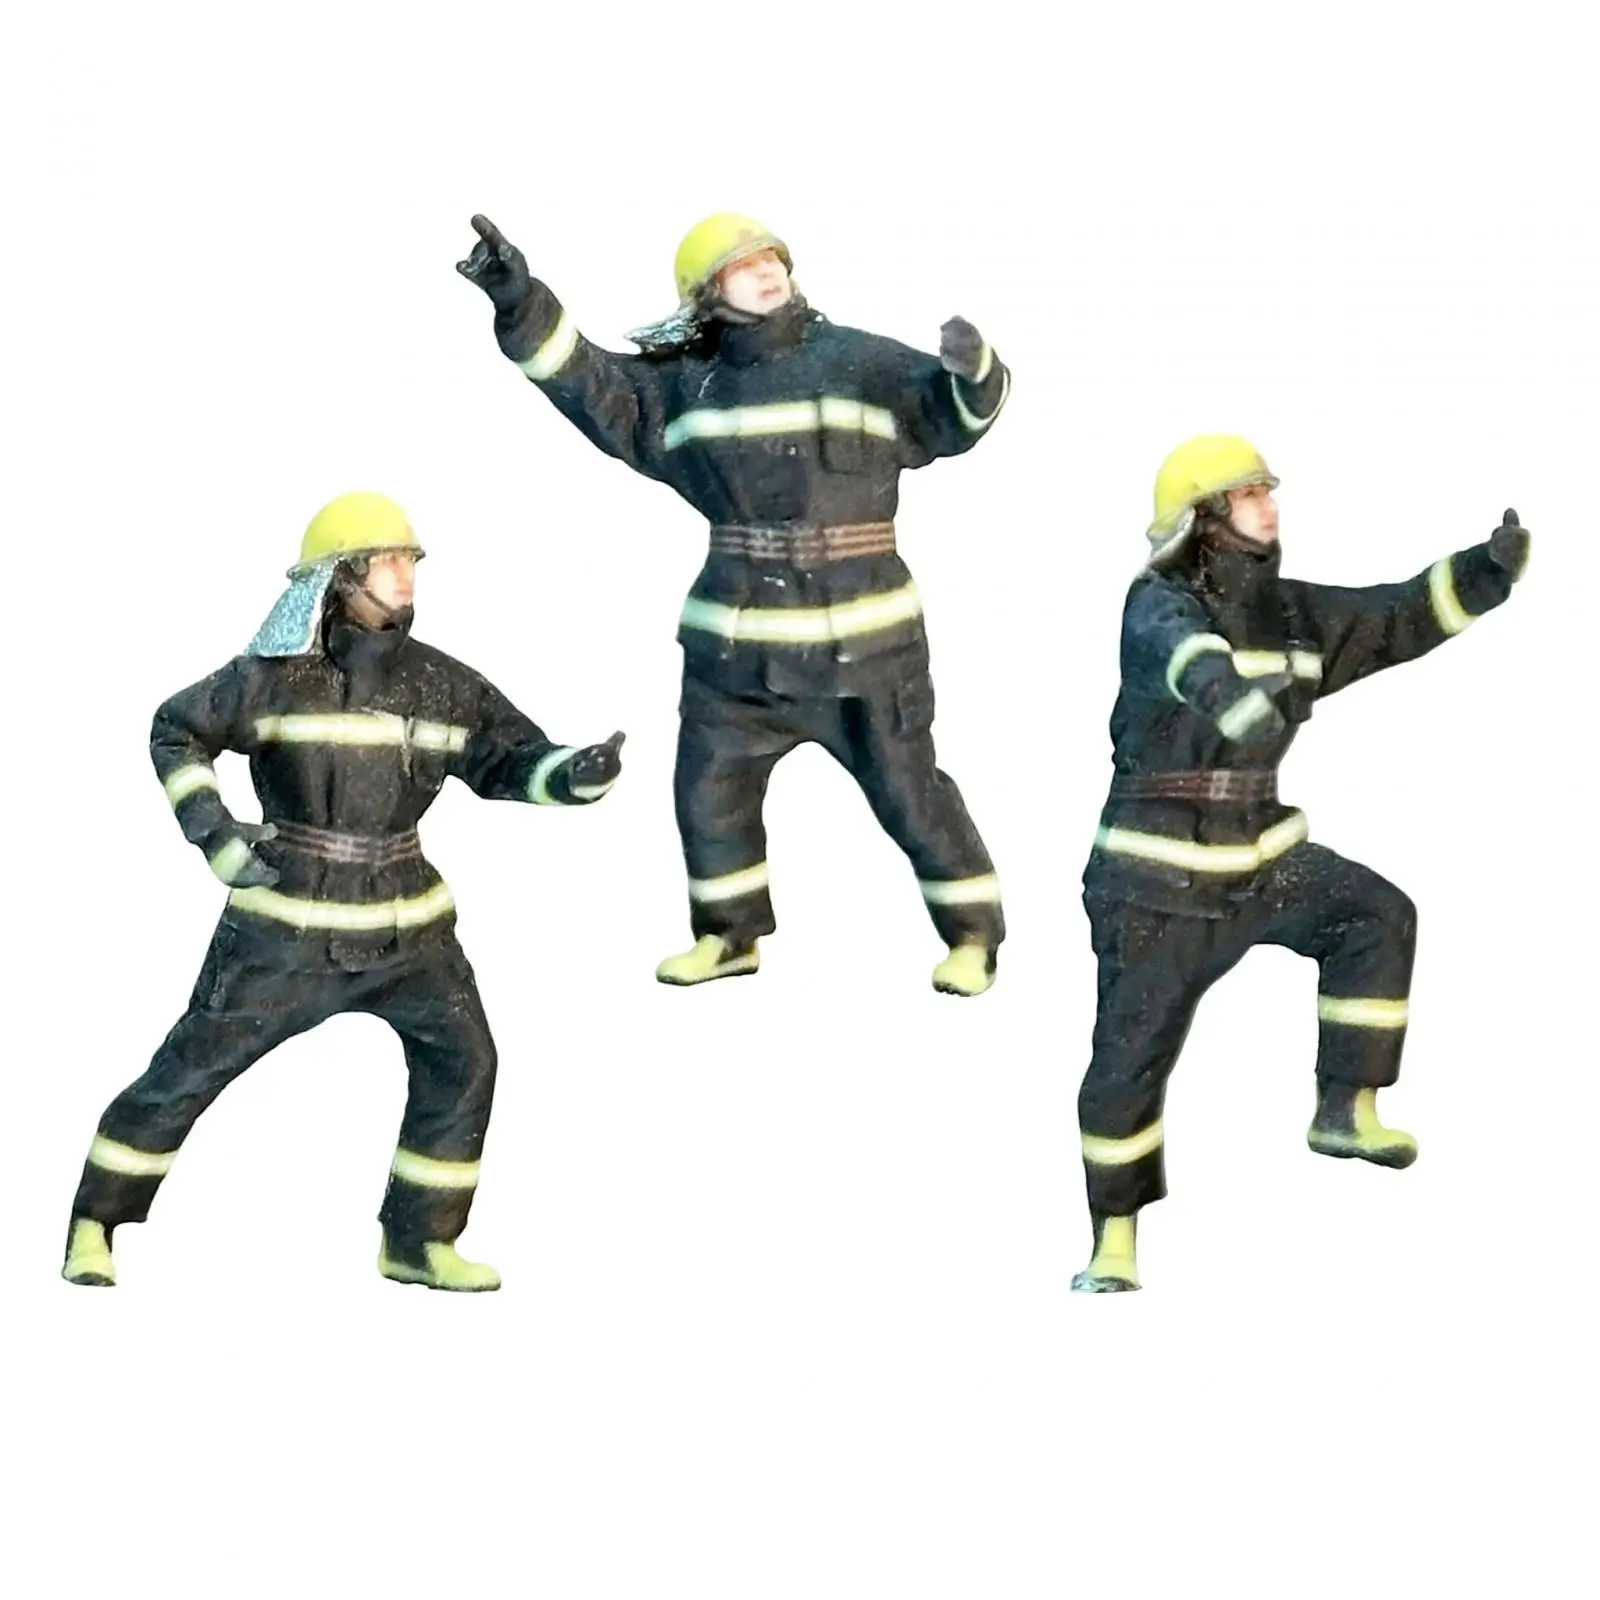 3 Pieces Miniature Firefighter Figures Realistic Model Trains People Figures for Diorama Micro Landscapes Decor Accessories